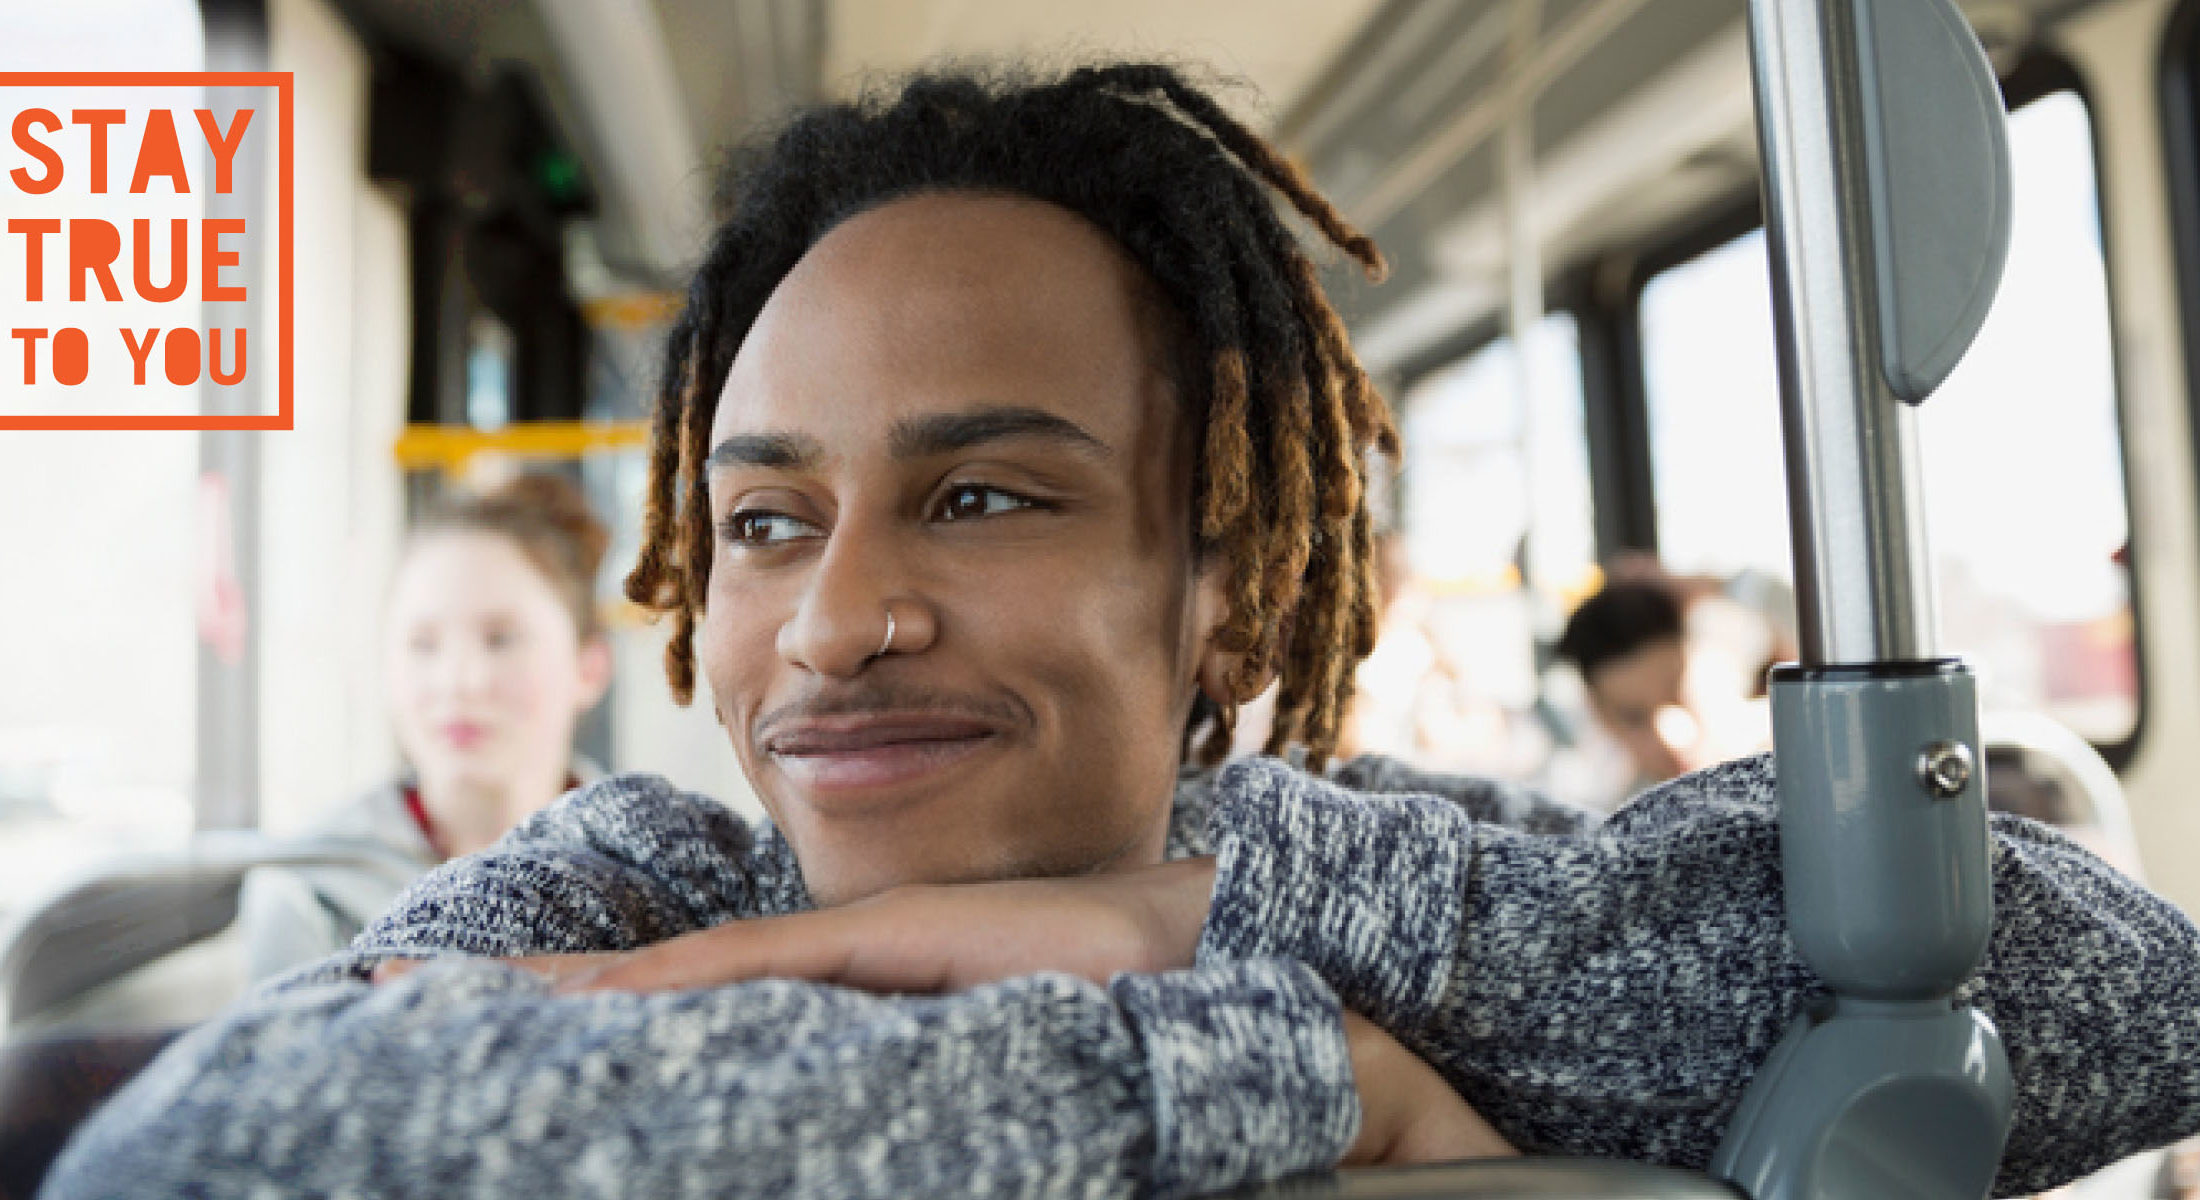 Black teen with nose ring in bus looking out window smiling Stay True To You